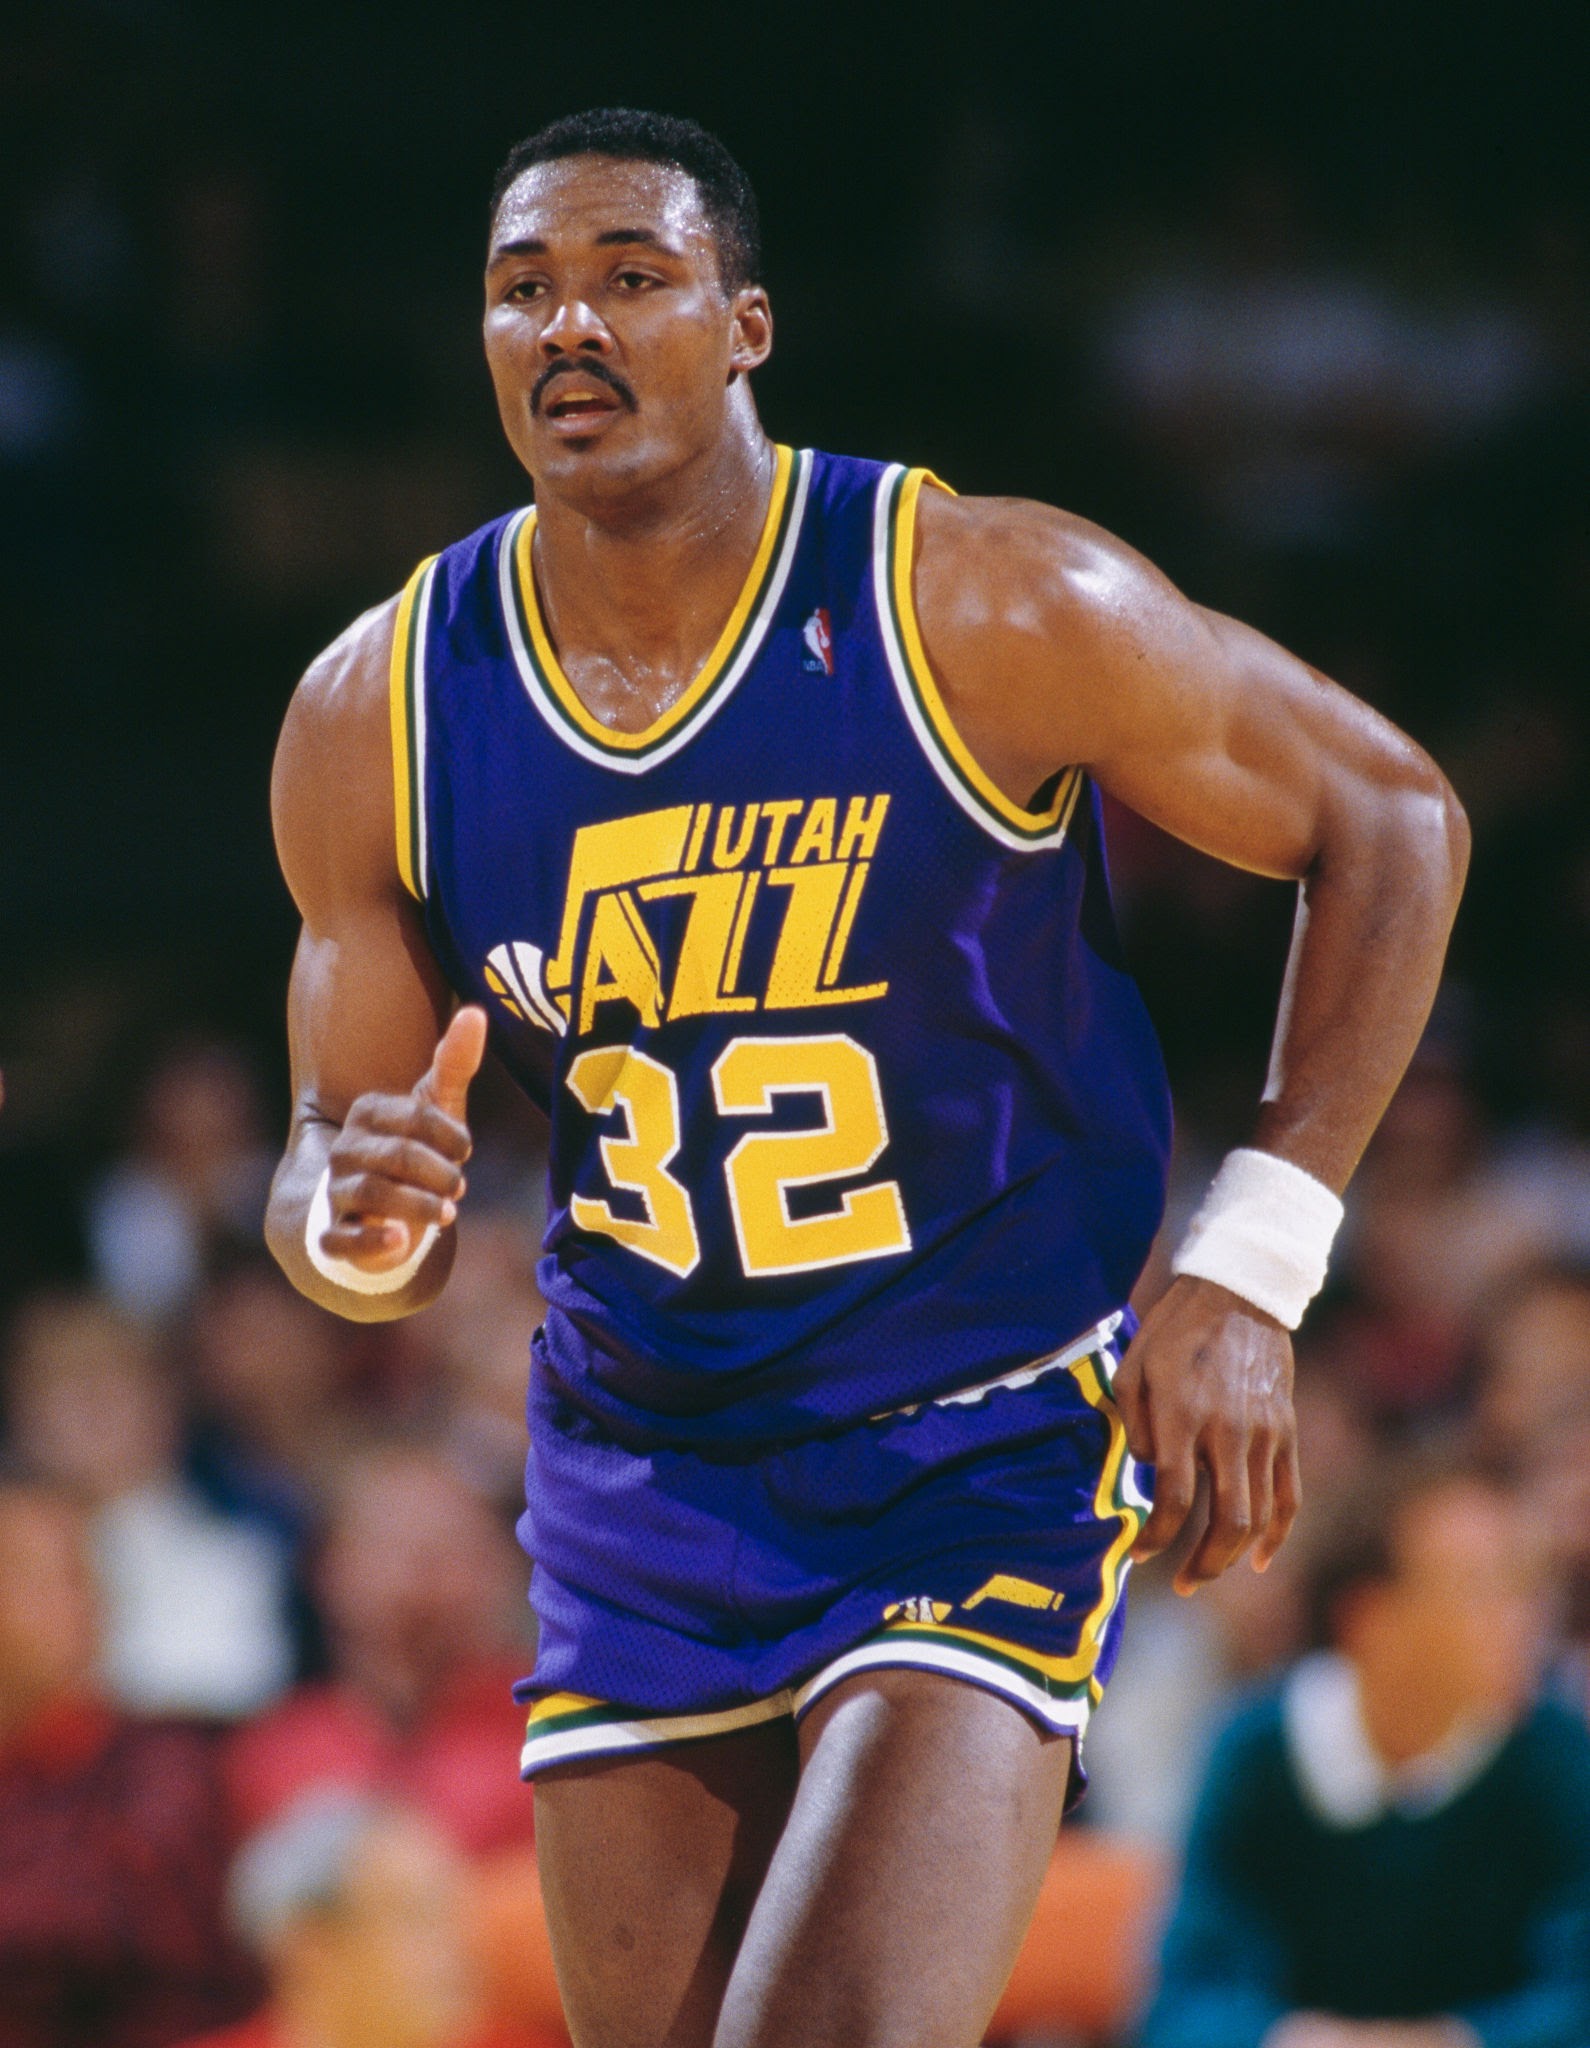 Karl Malone Biography: Age, Net Worth, Instagram, Spouse, Height, Wiki, Parents, Siblings